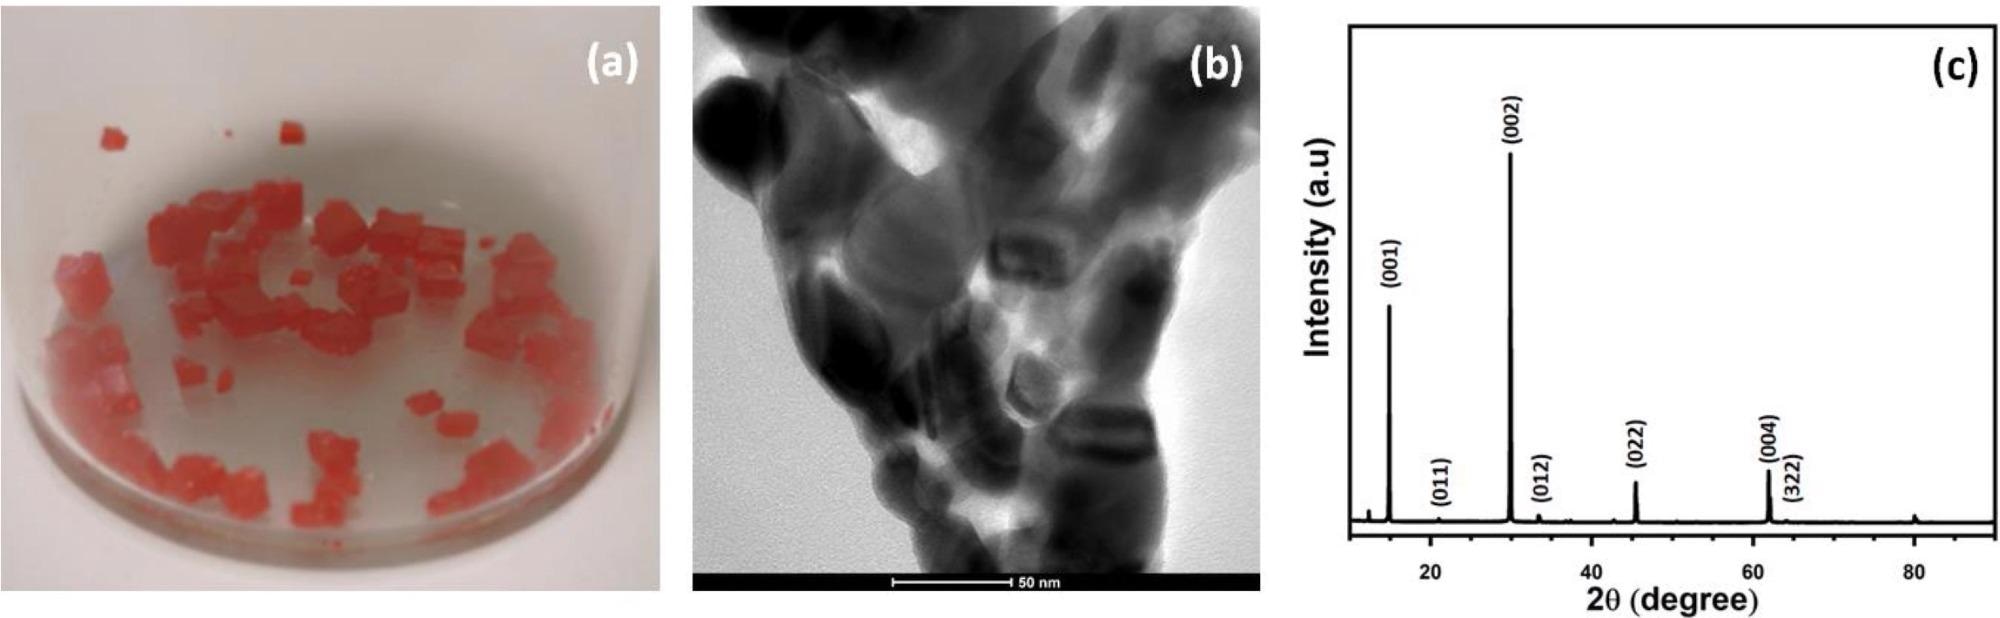 (a) Picture of the synthesized FAPbBr3 grains. (b) TEM image of the crushed FAPbBr3 grains. (c) XRD spectrum of FAPbBr3 with Miller indices on the figure.